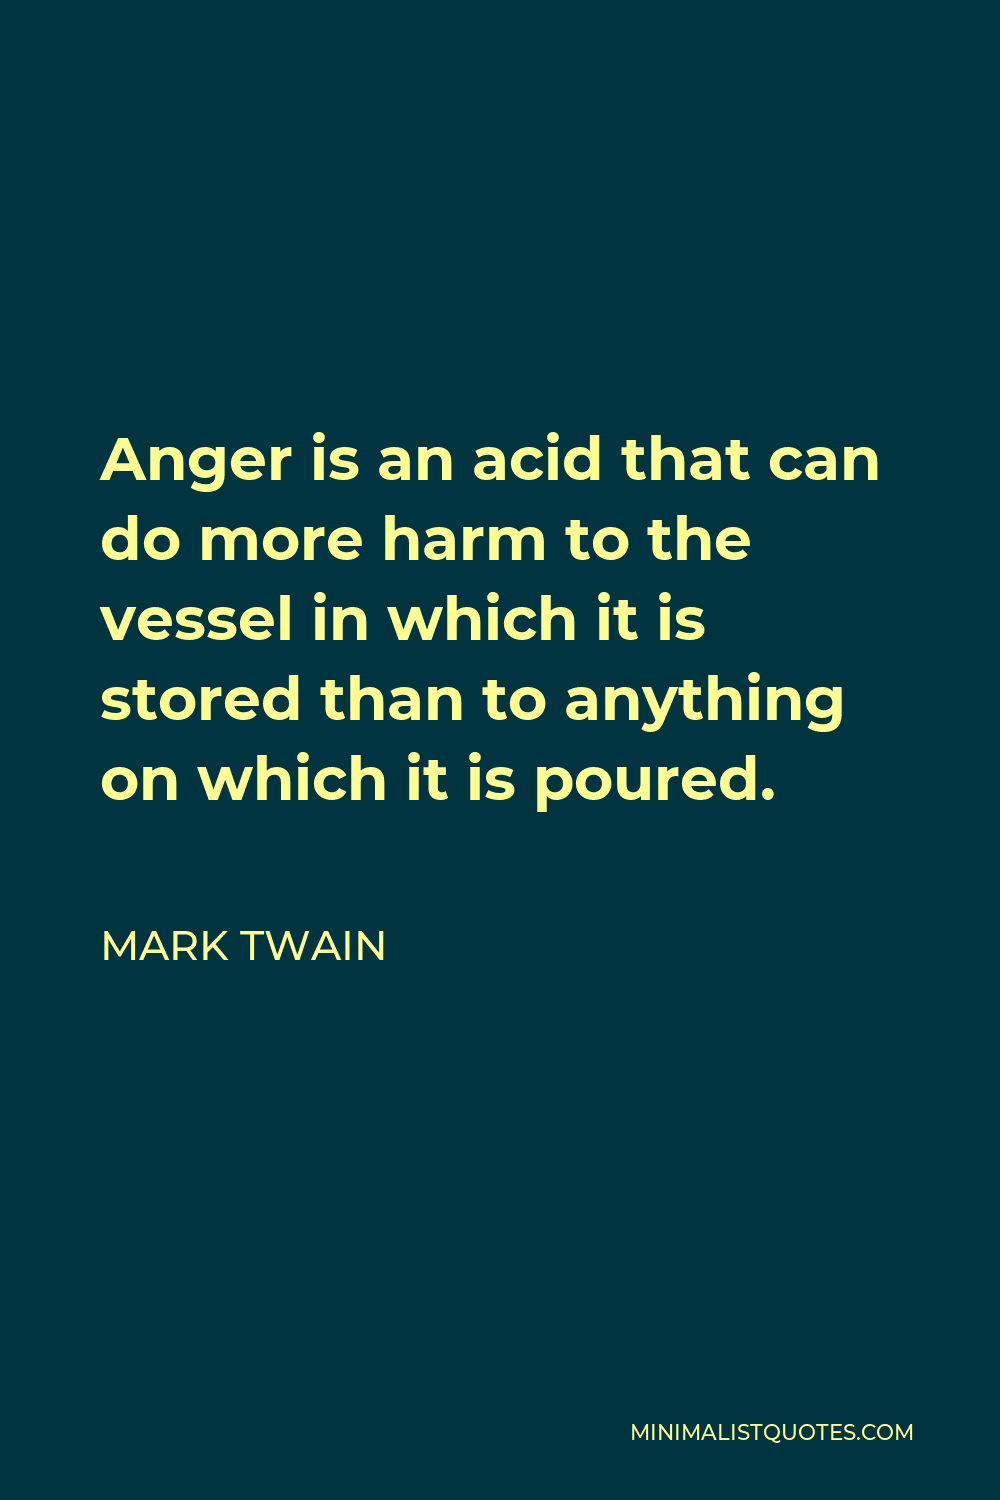 Mark Twain Quote - Anger is an acid that can do more harm to the vessel in which it is stored than to anything on which it is poured.